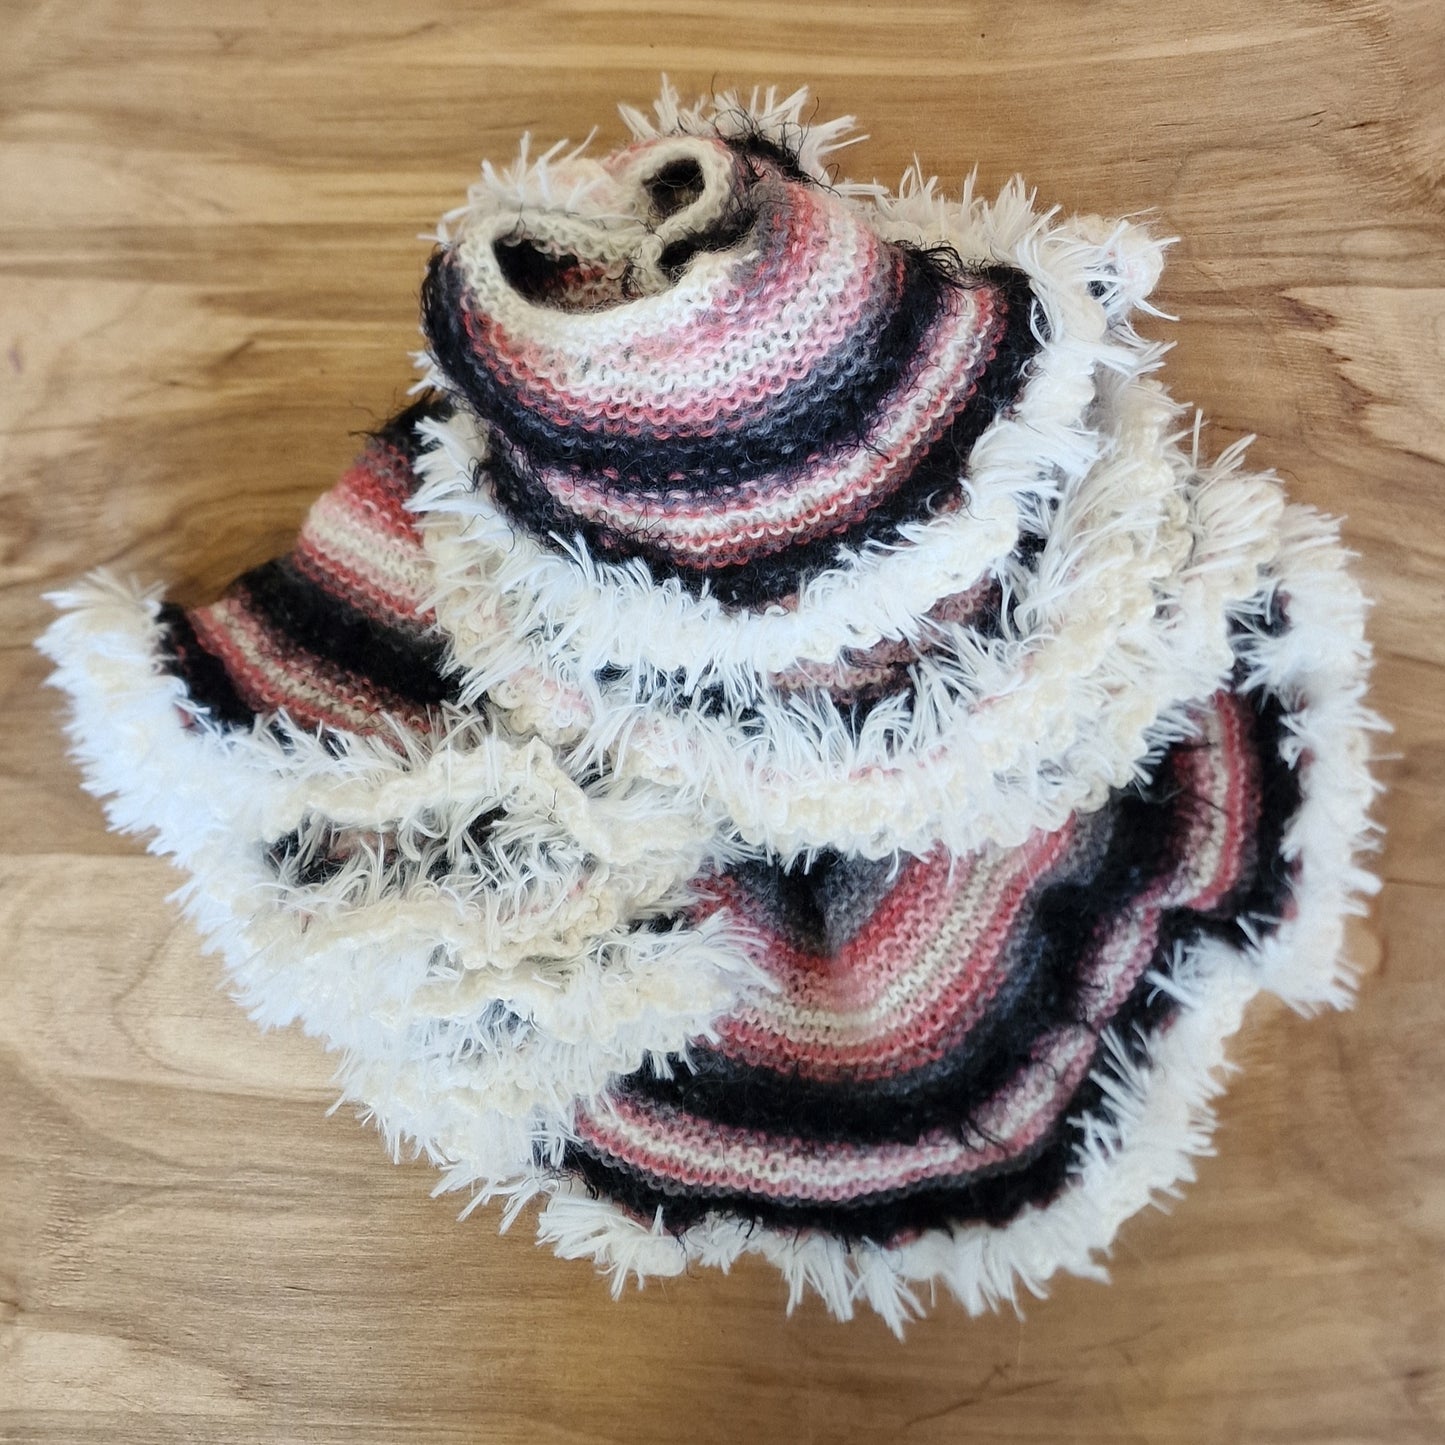 Hand-knitted round scarf pink/black/white (MY 22)